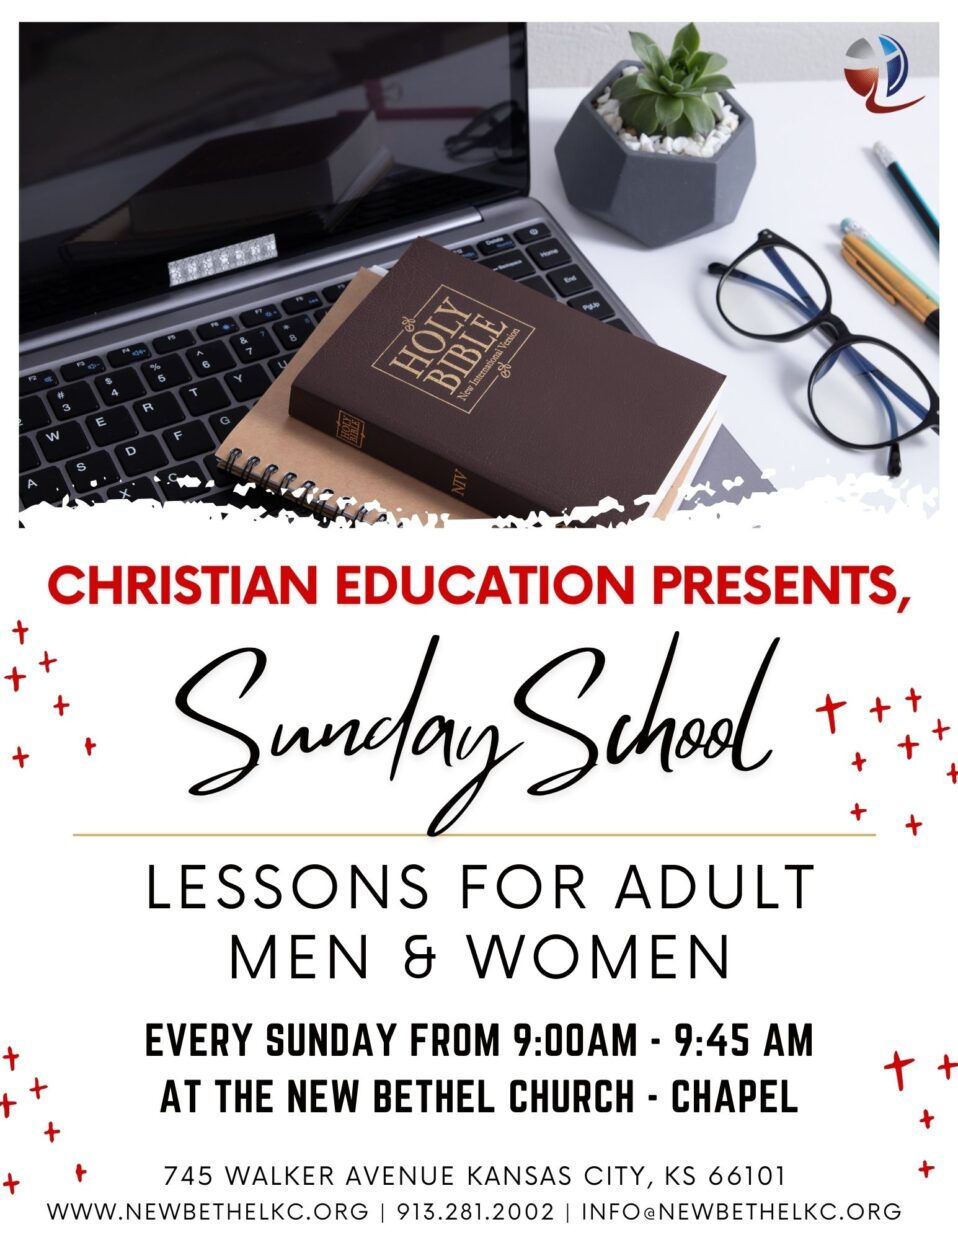 InPerson Adult Sunday School Lesson The New Bethel Church